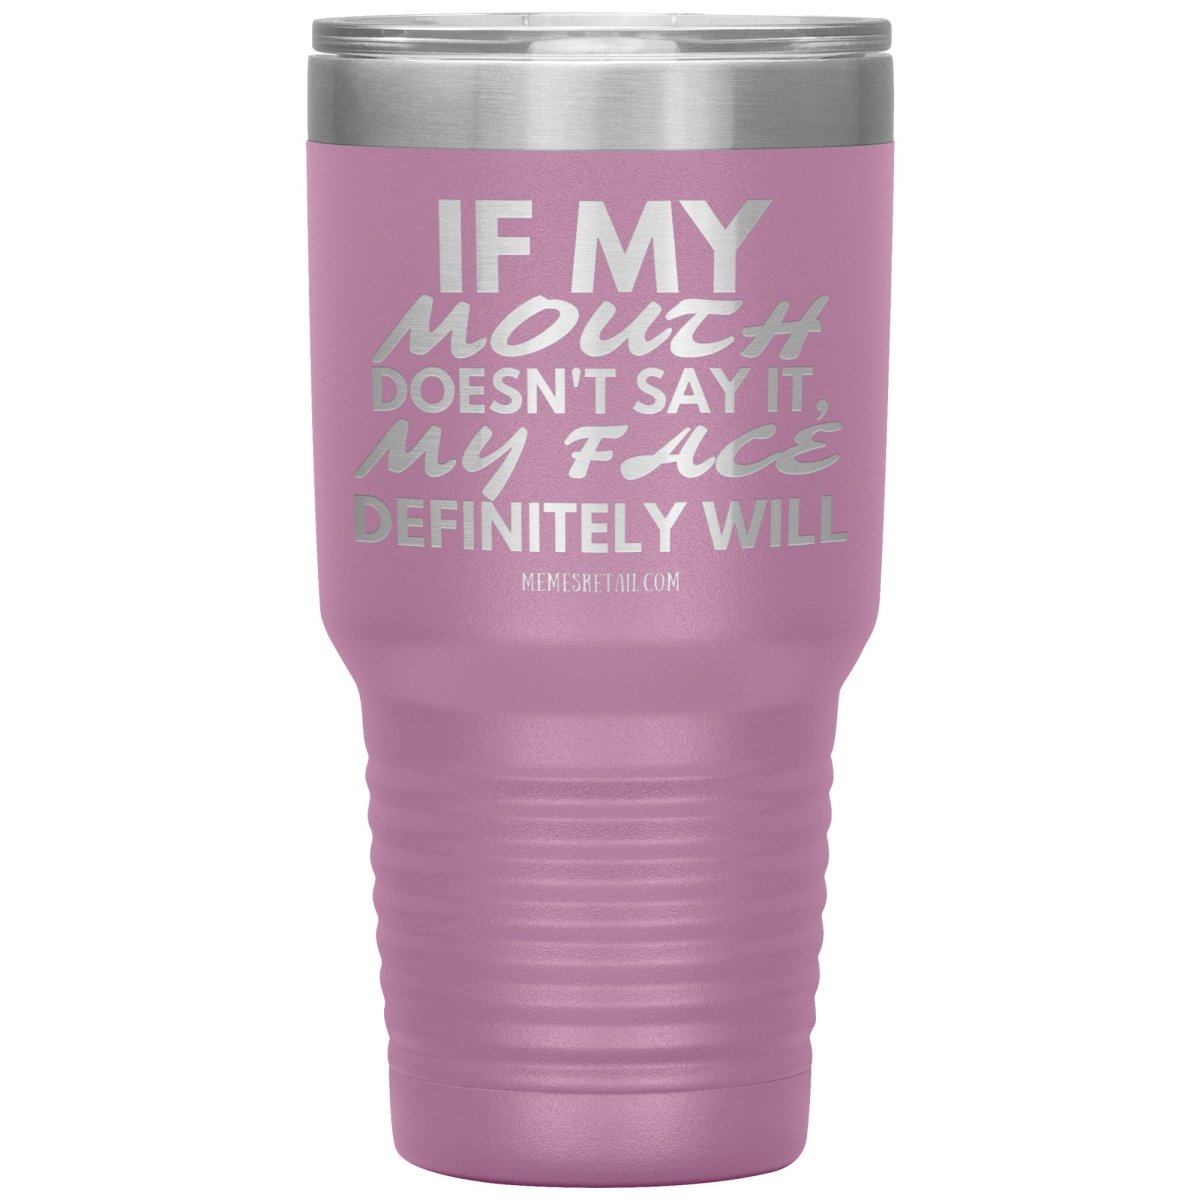 If my mouth doesn't say it, my face definitely will Tumblers, 30oz Insulated Tumbler / Light Purple - MemesRetail.com